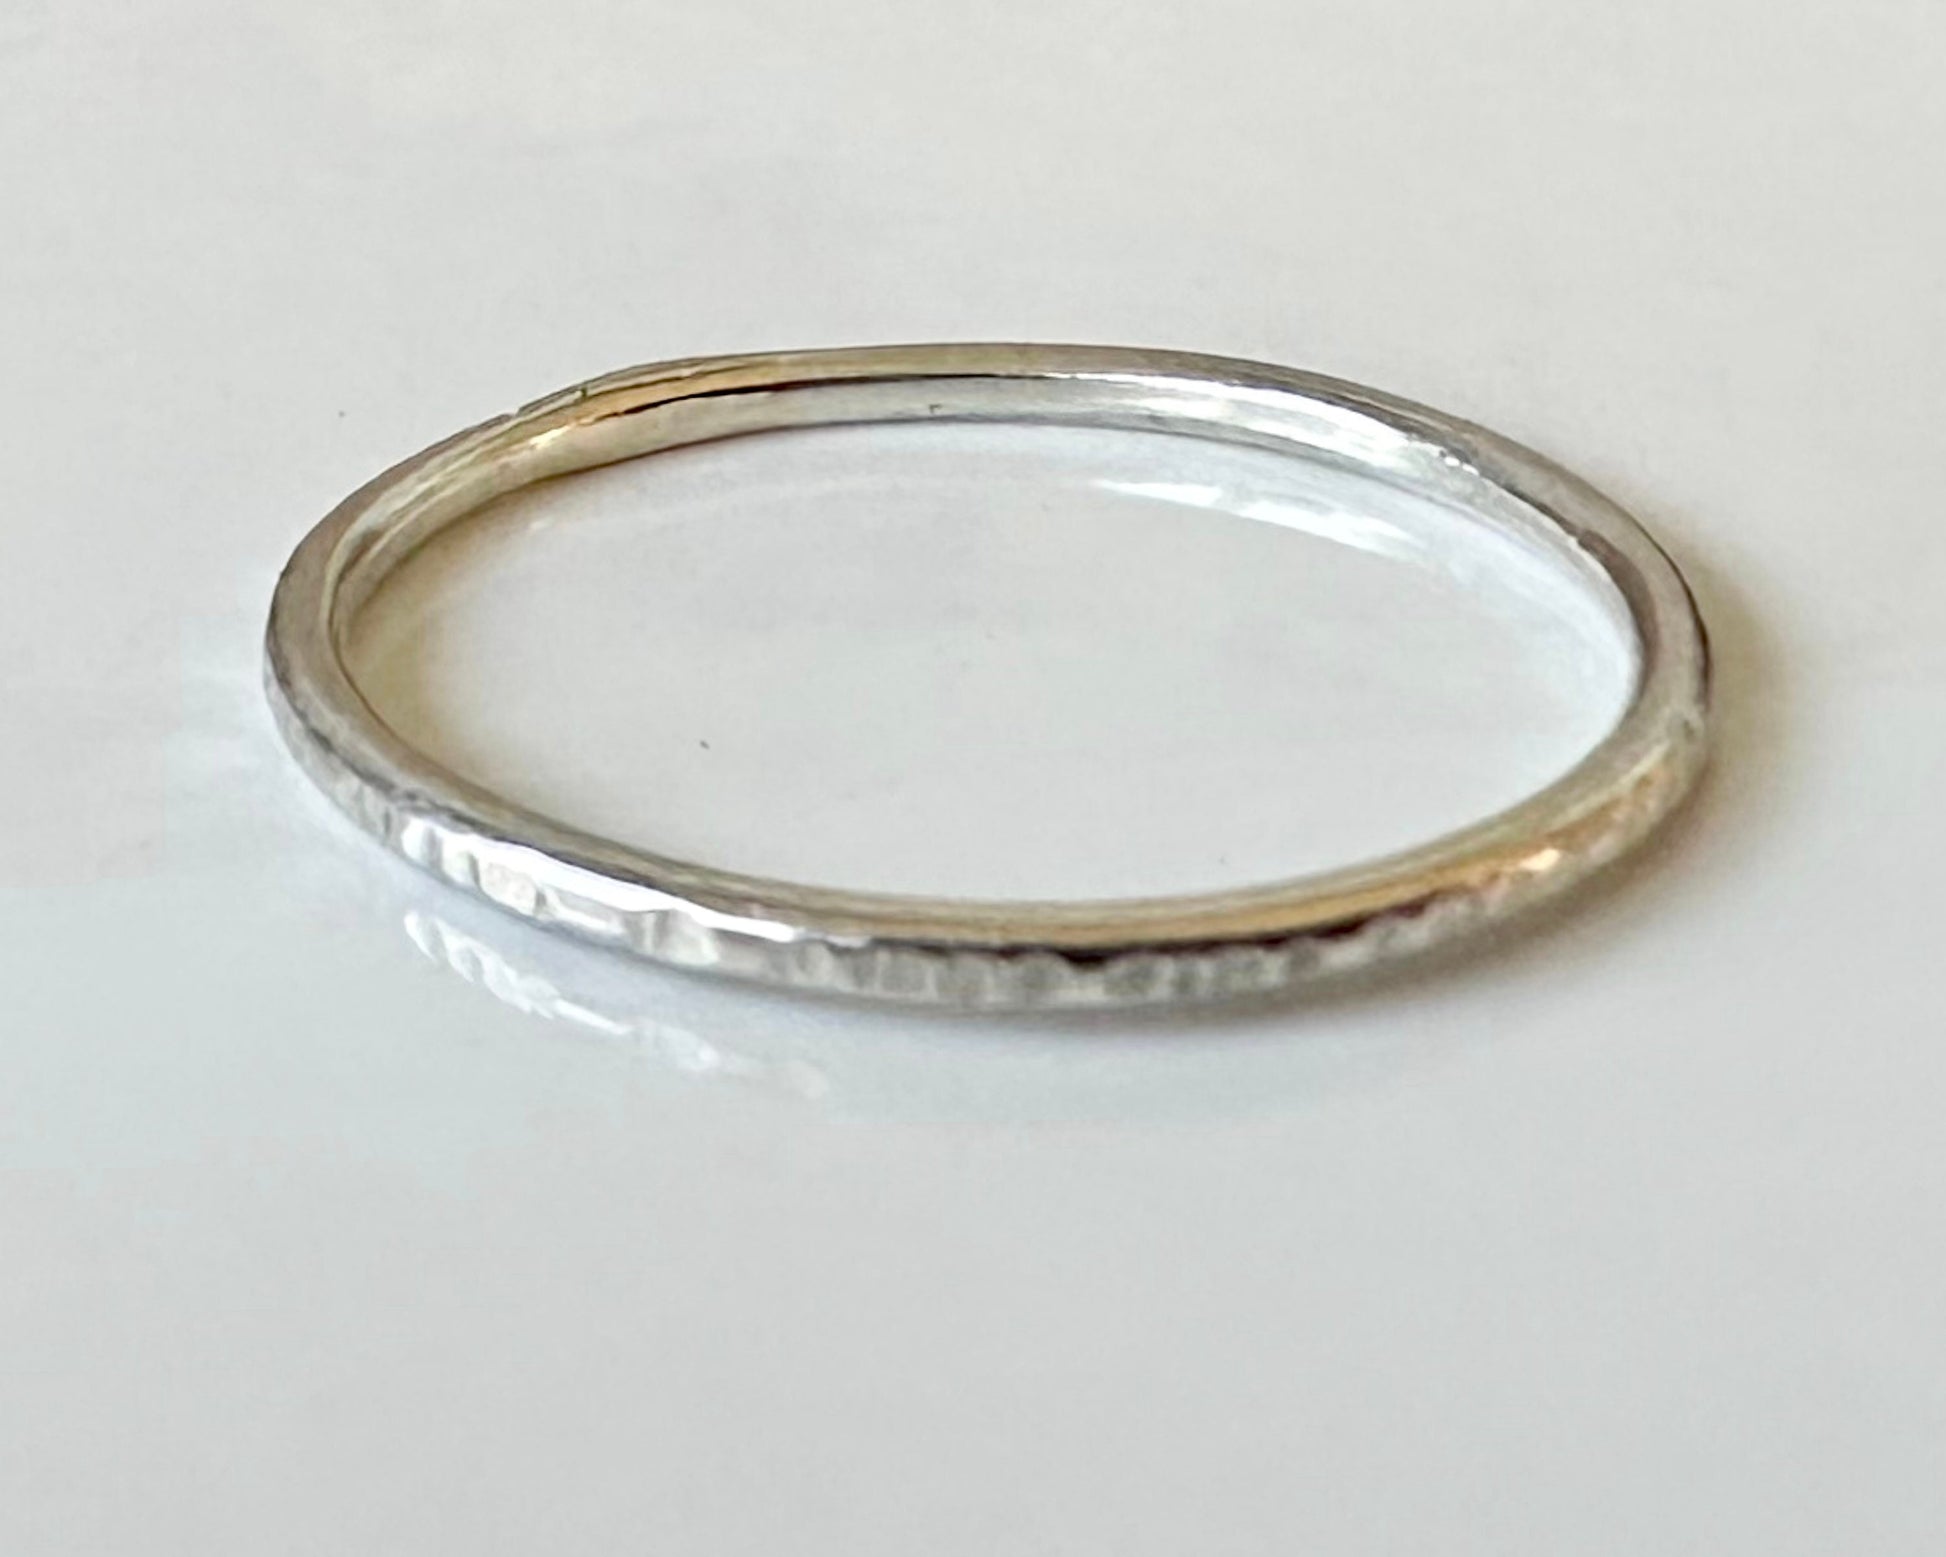 9ct Gold and 925 Sterling Silver Ring Set, 1.2mm Ring Bands Gold and Silver Ring Set of Four, Hammered Ring, Plain Ring, Thin Stacking Rings